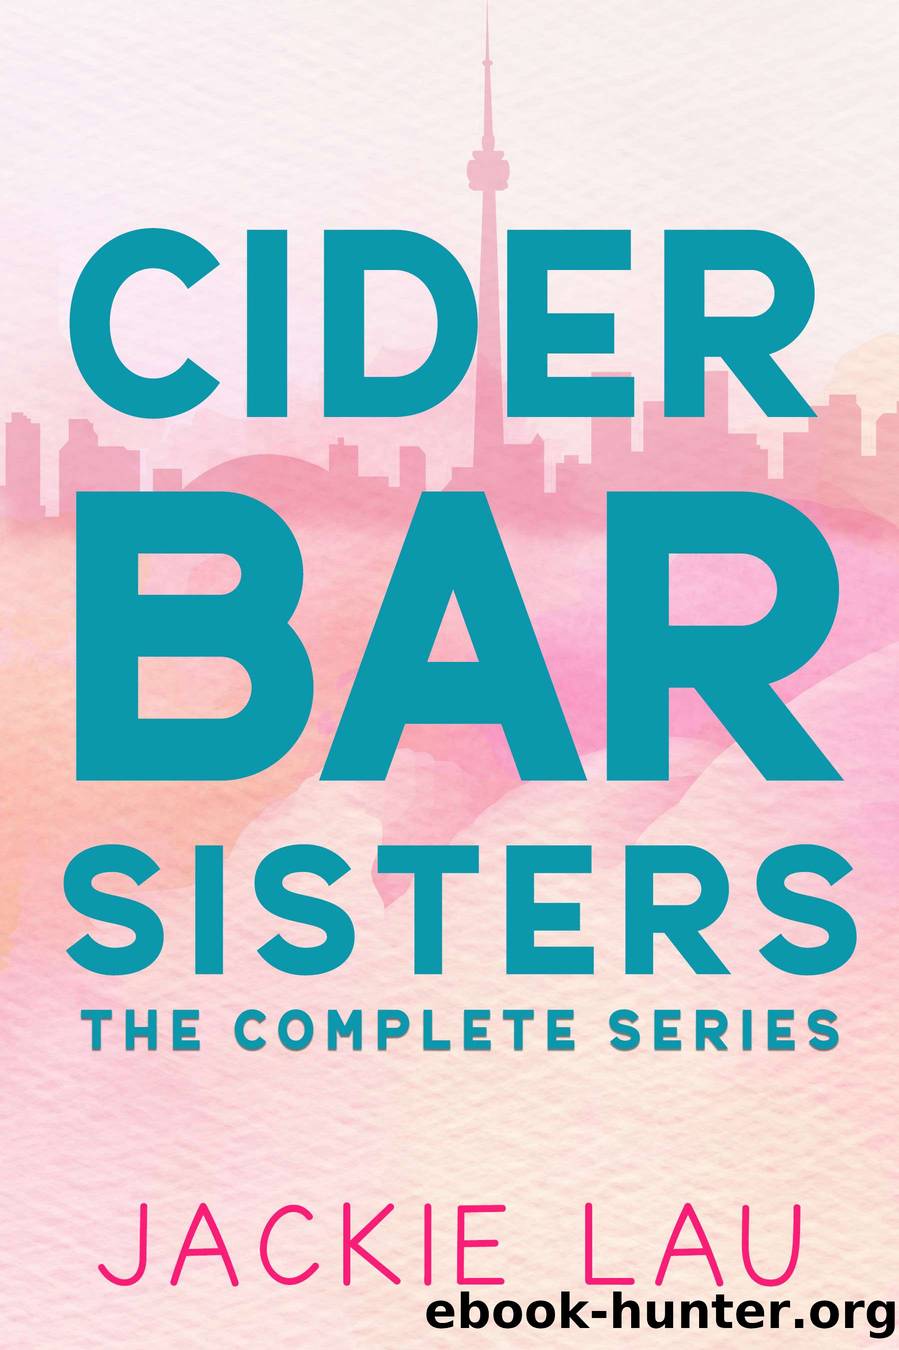 Cider Bar Sisters: The Complete Series by Jackie Lau